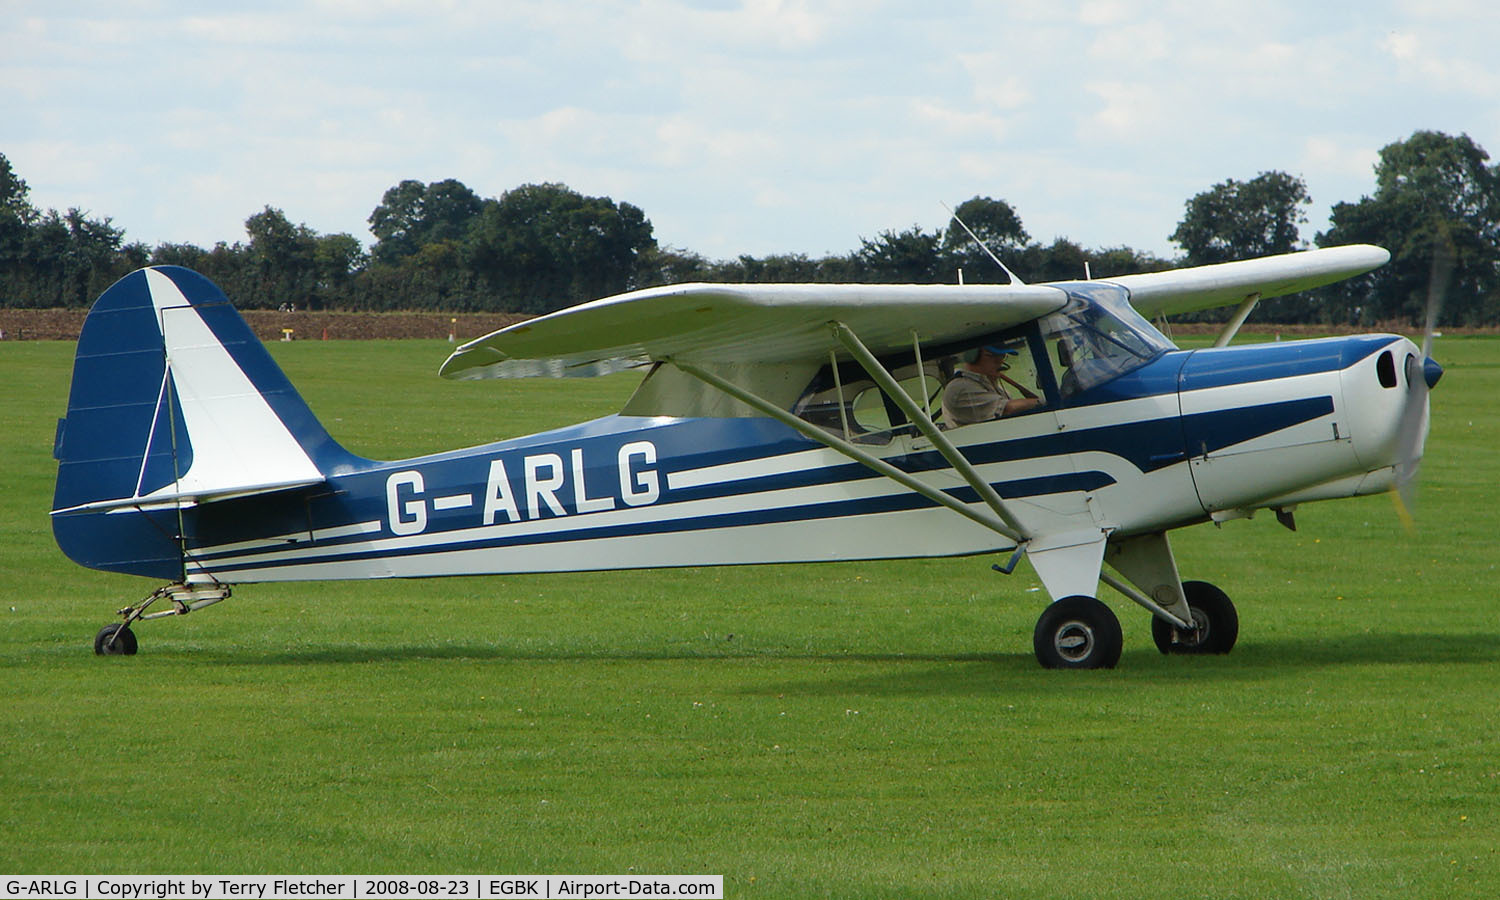 G-ARLG, 1961 Auster D4-108 C/N 3606, Visitor to Sywell on 2008 Ragwing Fly-in day